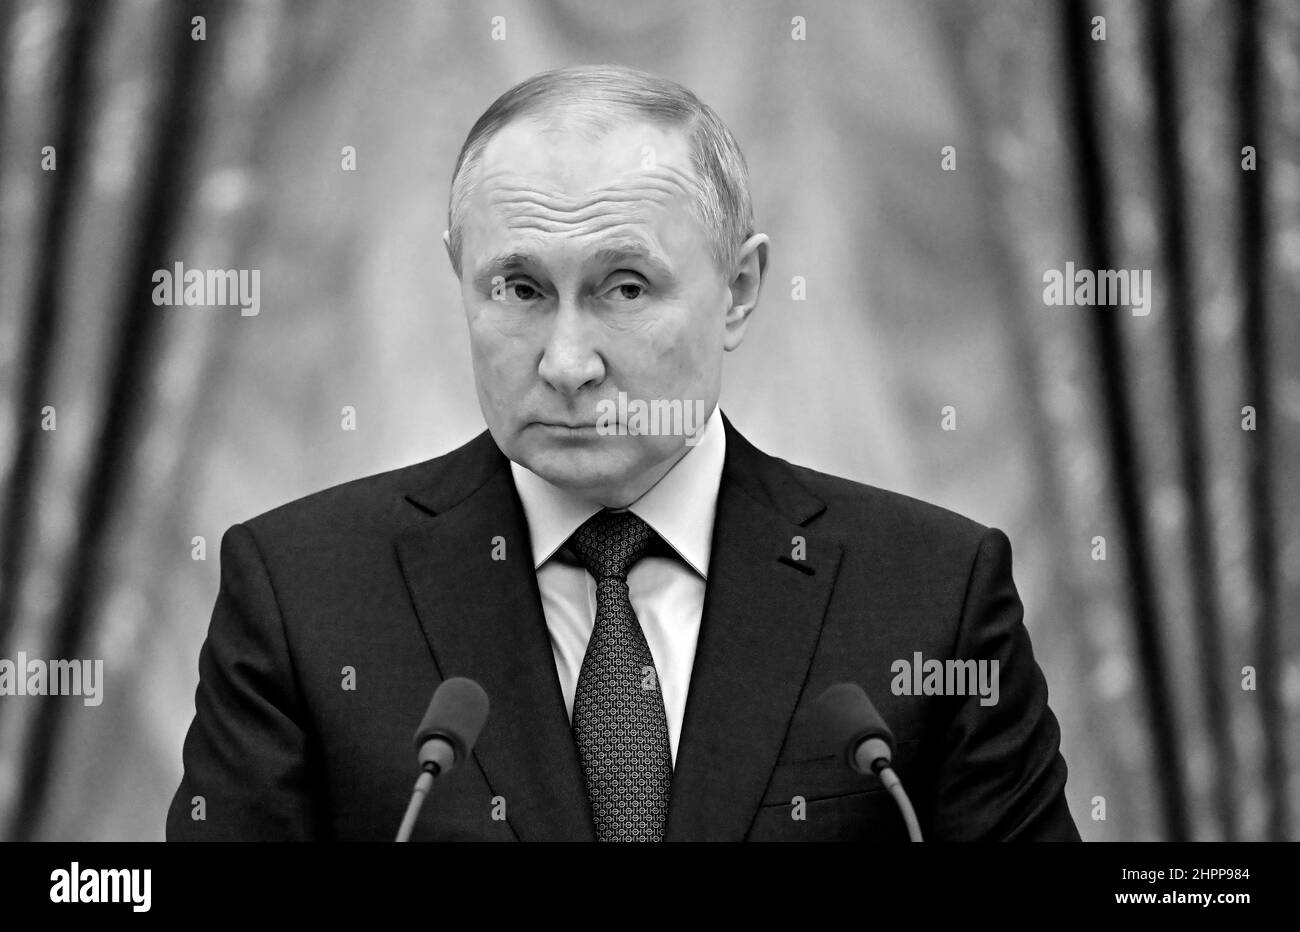 Russian President Vladimir Putin speaks on signing  documents recognizing Donetsk and Lugansk People’s Republics as independent states.. Donetsk and Lugansk are breakaway regions of Ukraine. Stock Photo